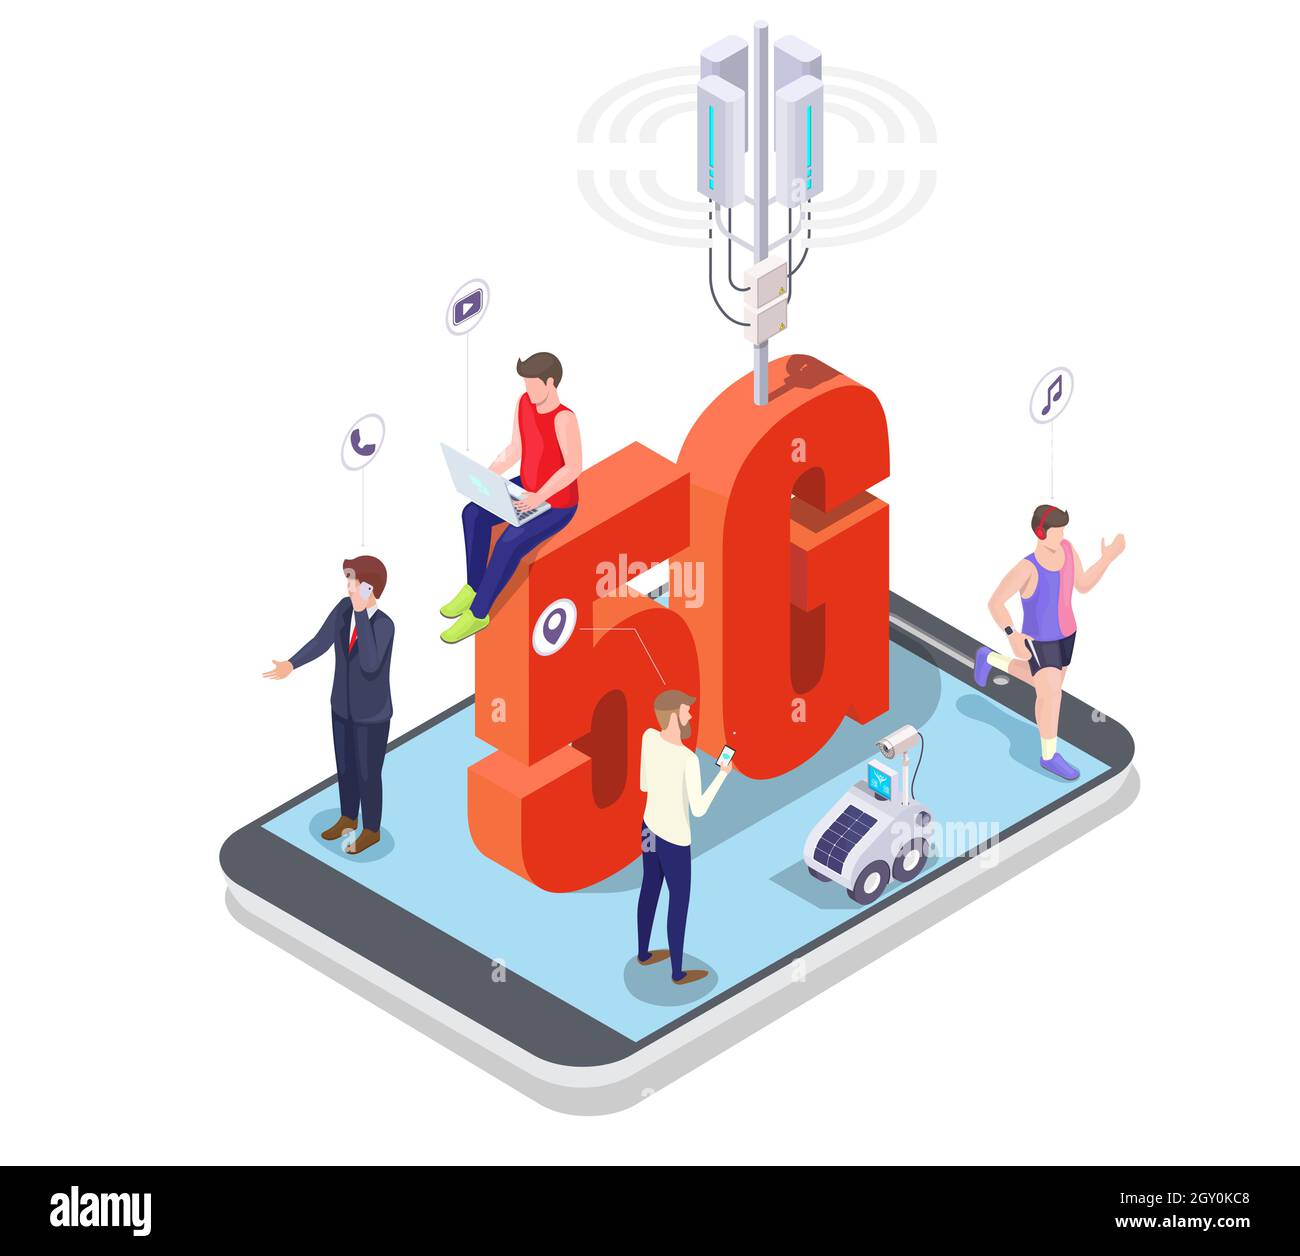 5g cell tower, people using mobile phone, laptop, smart watch on smartphone screen. 5g network mobile systems, vector. Stock Vector